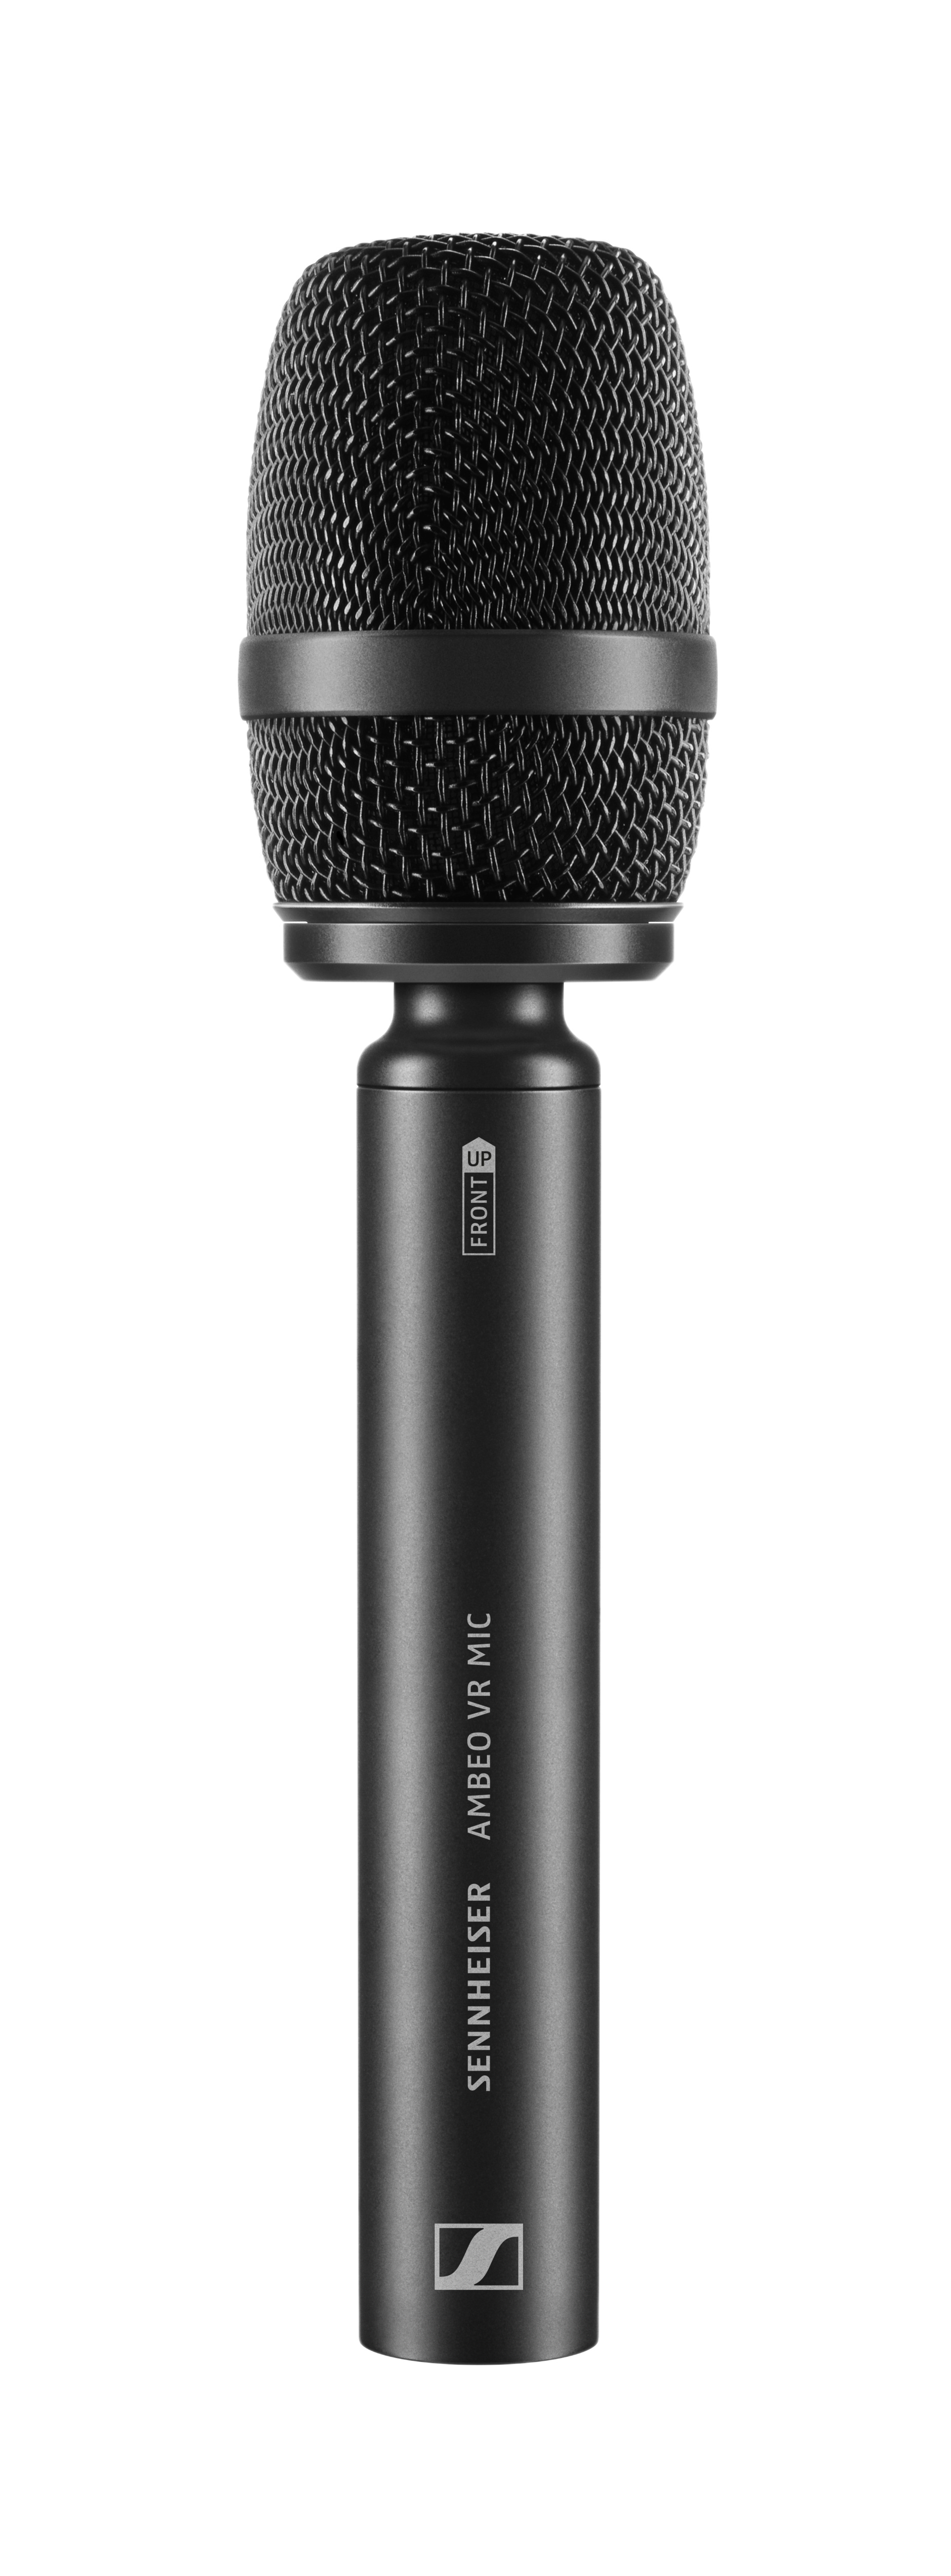 AMBEO_VR_Mic_product_shot_cutout_front_view.png